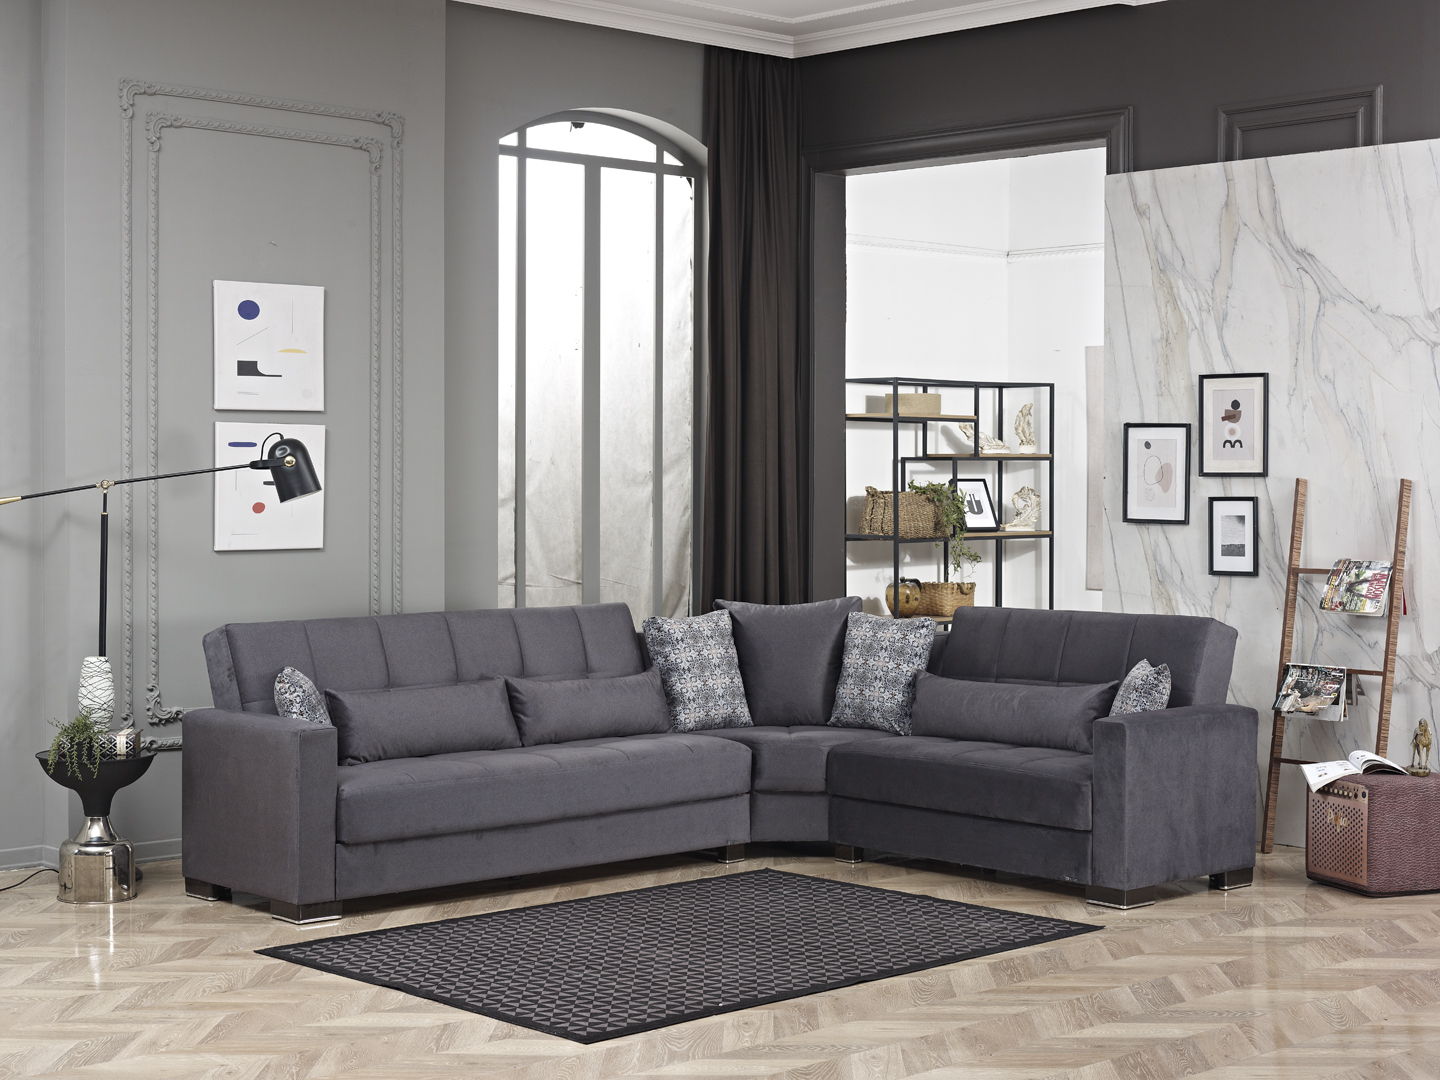 Ottomanson Armada - Convertible Sectional With Storage